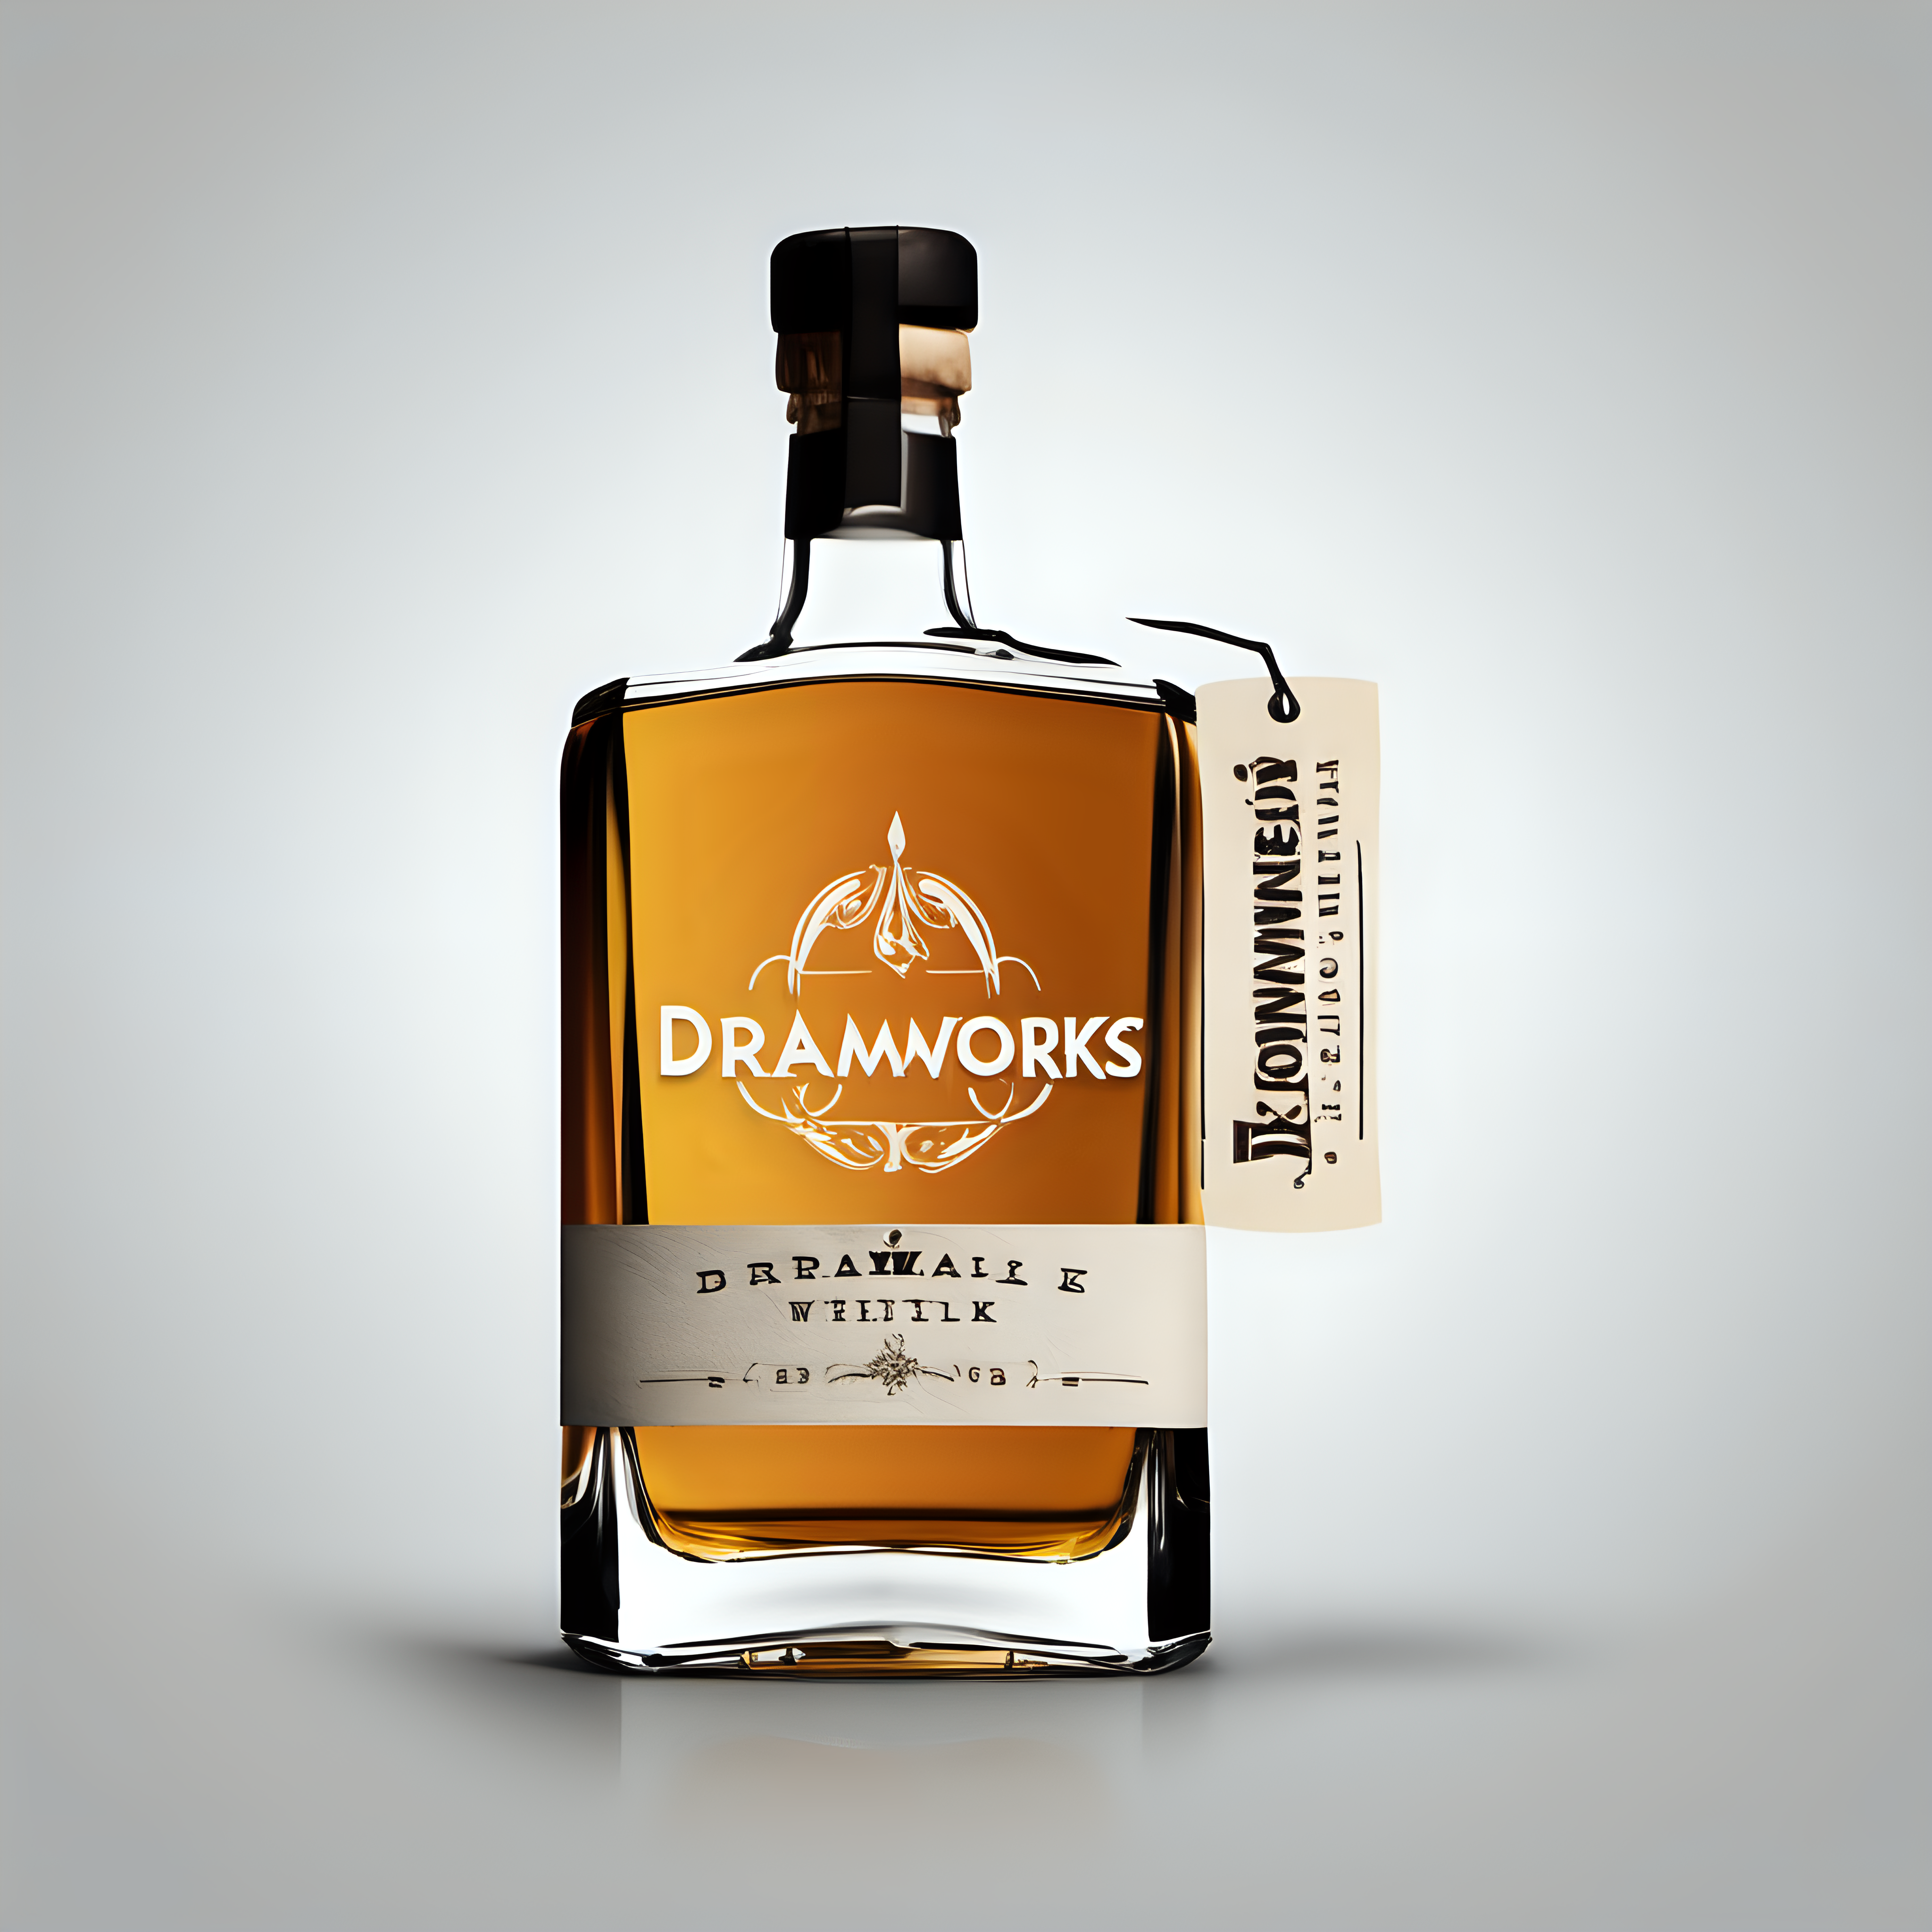 create a logo for "Dramworks" whisky brand using modern clean font